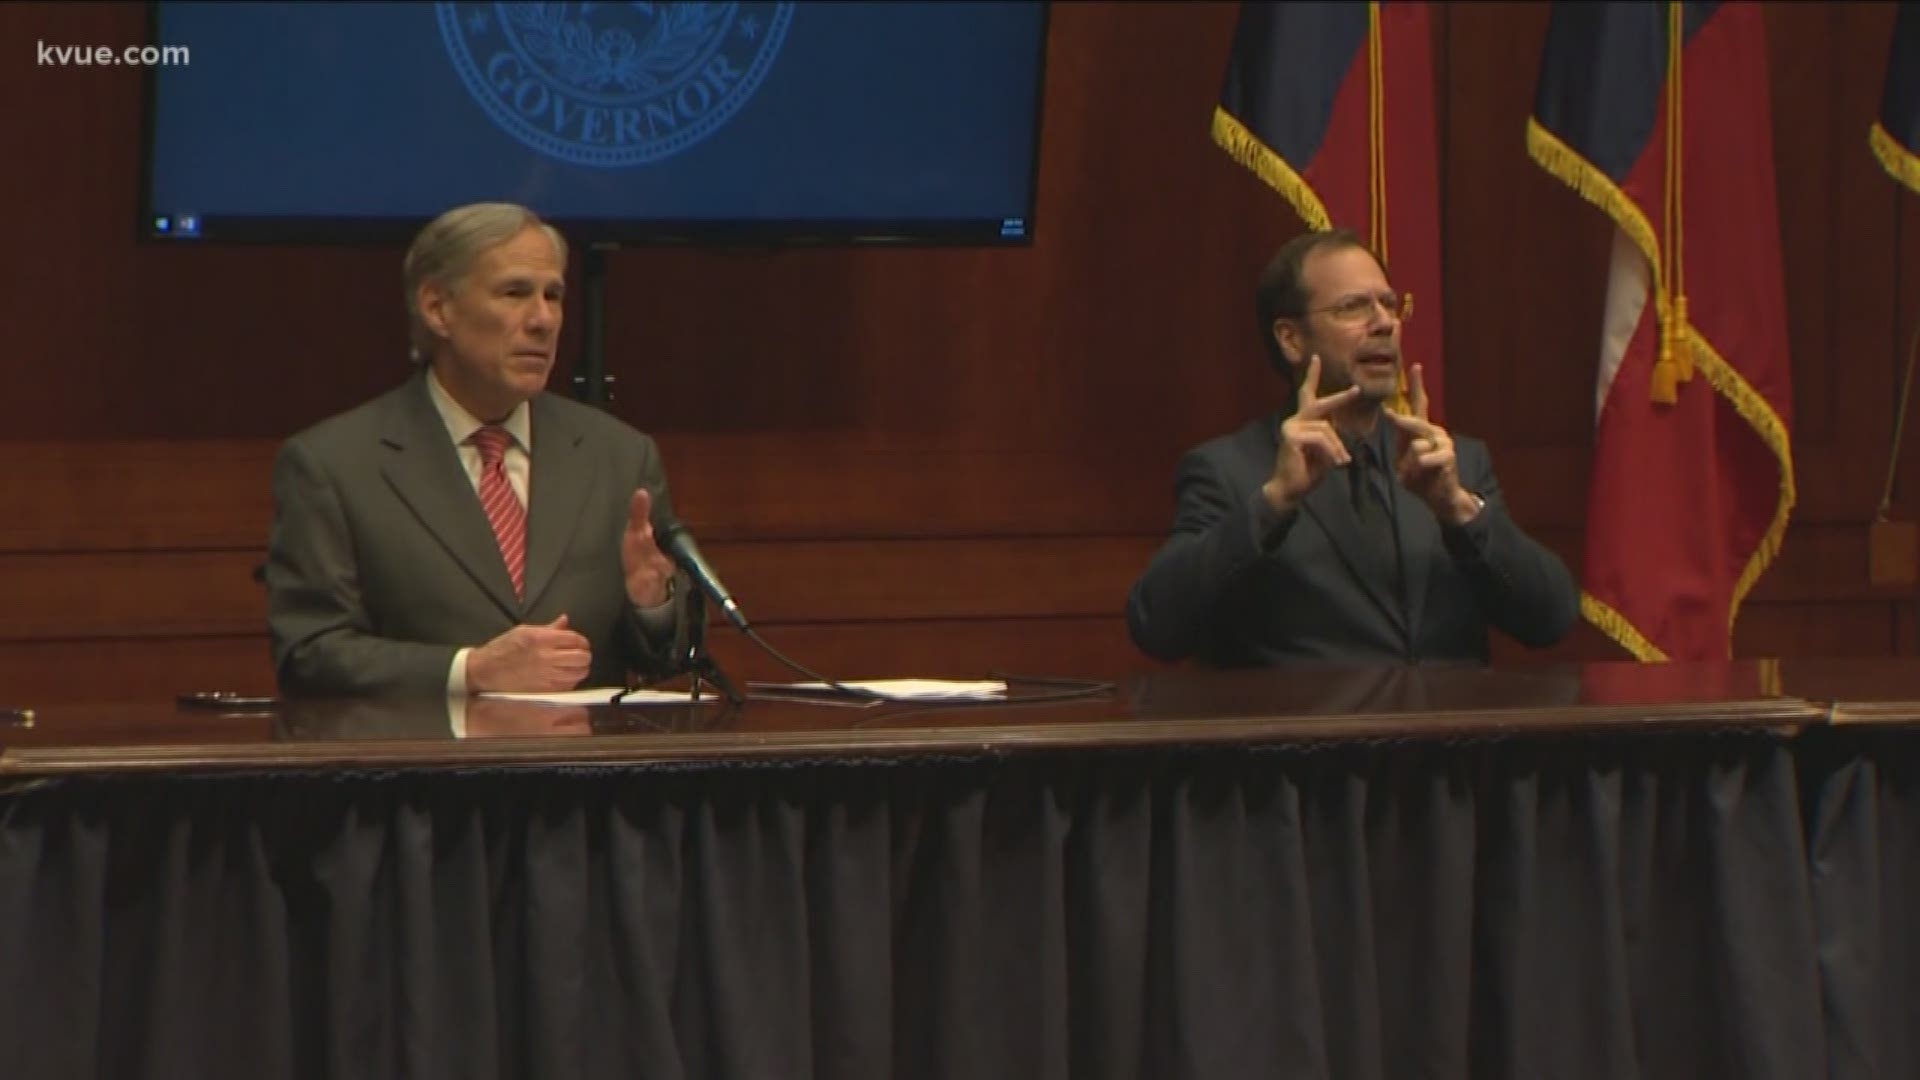 The governor talked about available resources and companies hiring in Texas at a press conference on Tuesday.